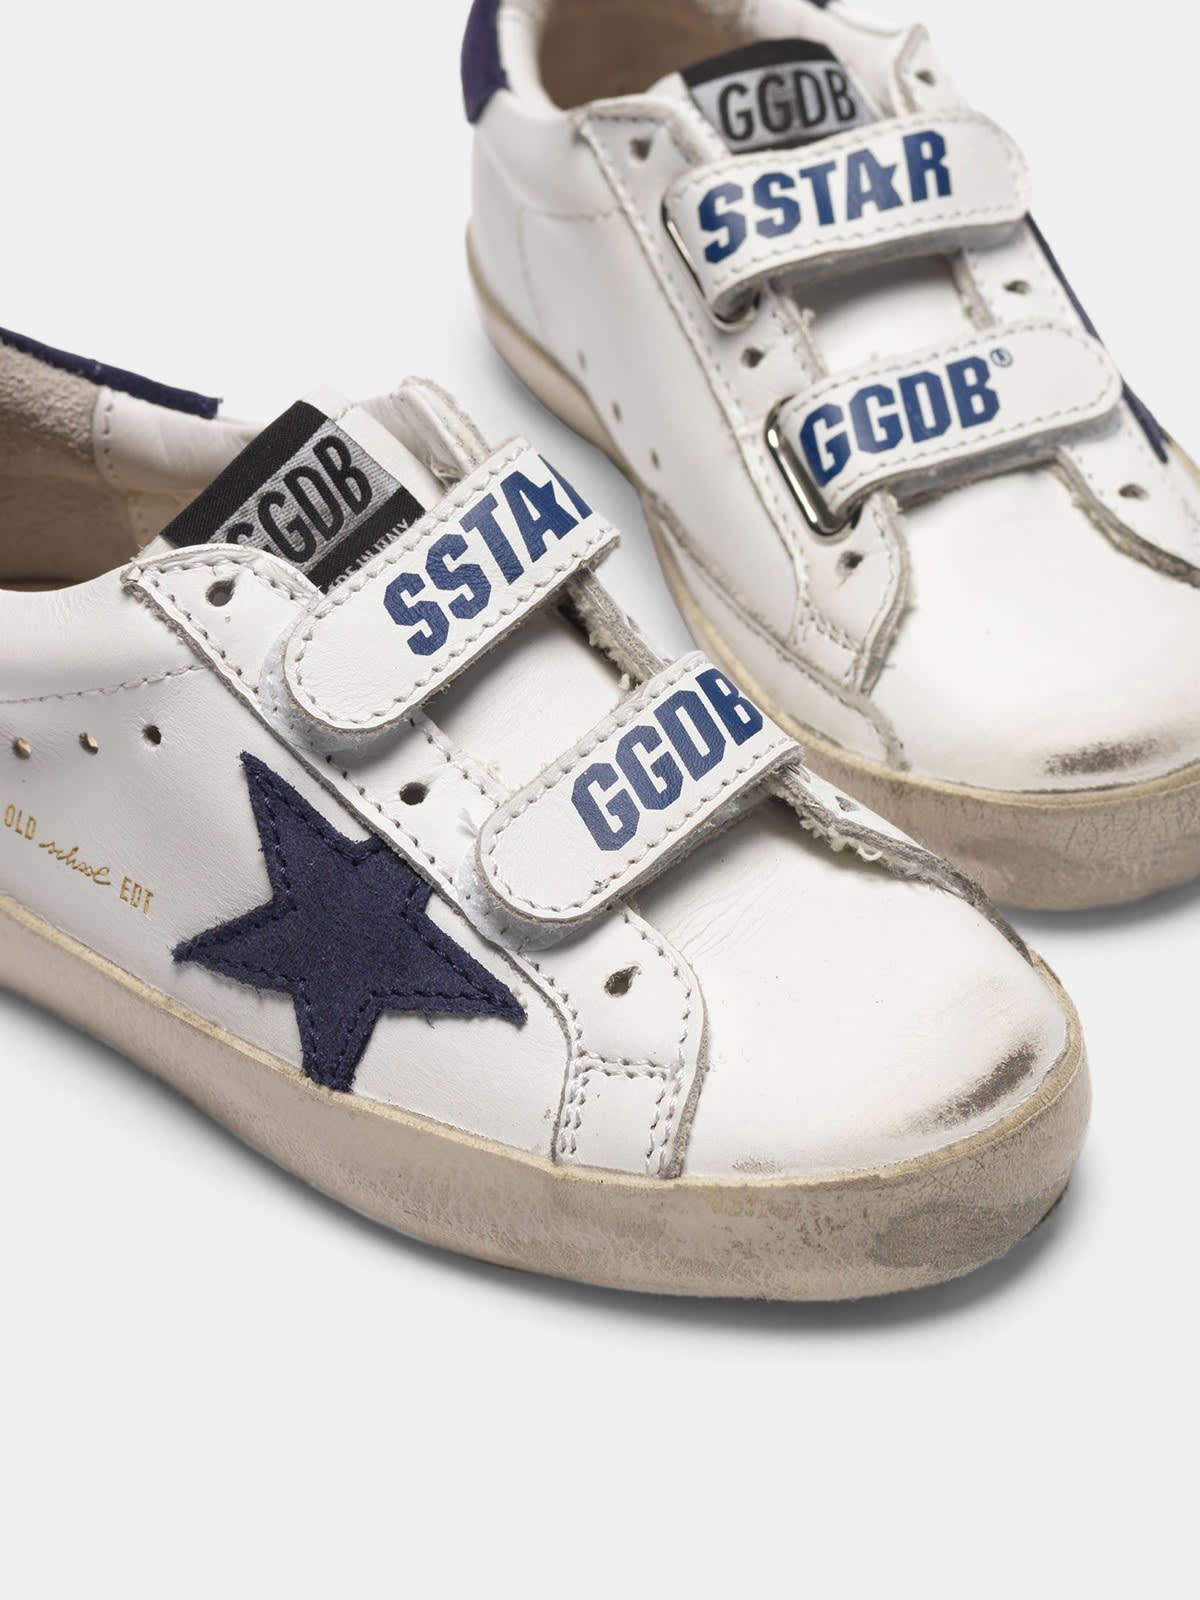 Old School sneakers with Velcro fastening and navy star